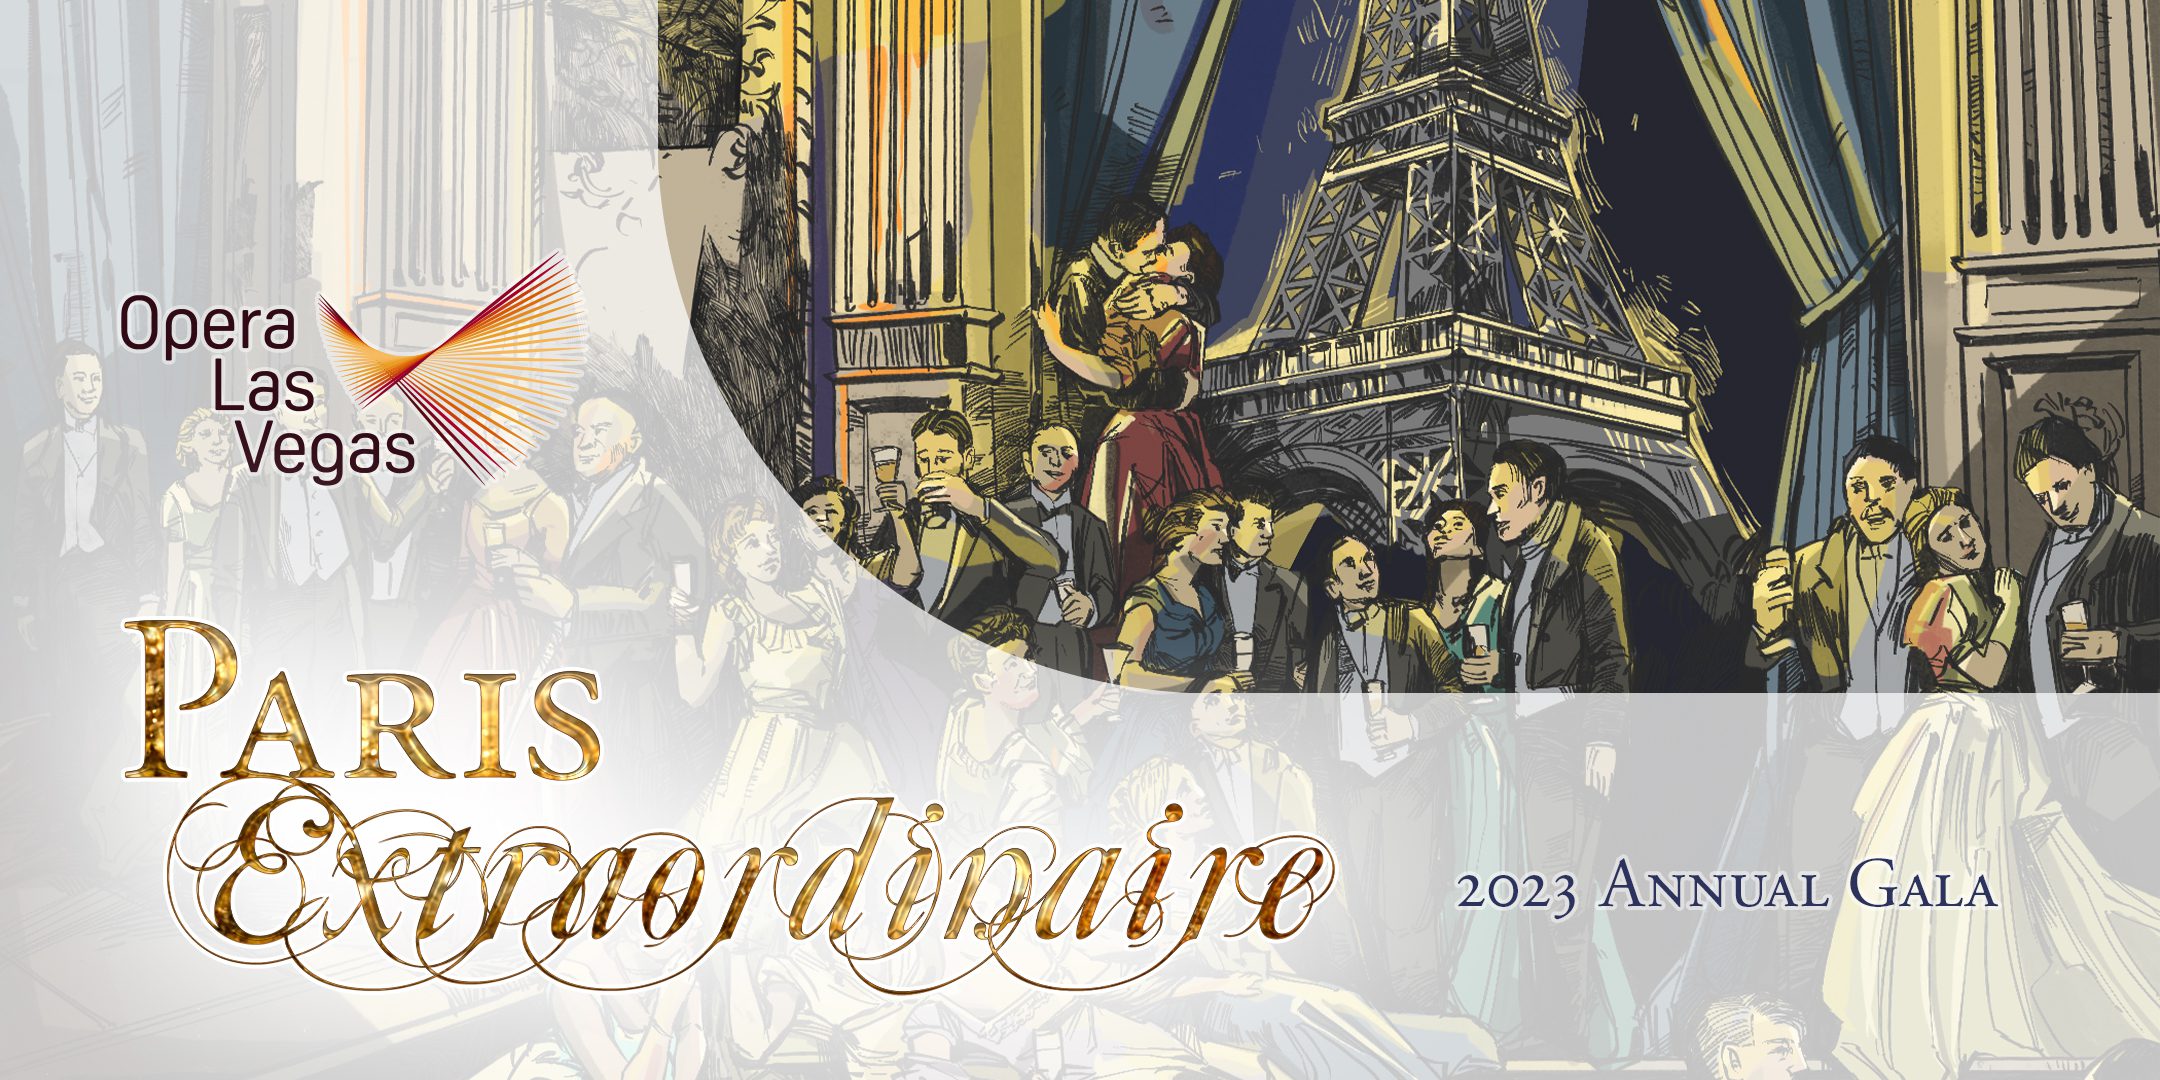 Opera Las Vegas' poster for their annual 2023 Gala, "Paris Extraordinaire." A crowd of 19th century Parisians gather for a formal ball in a luxurious ballroom with the Eiffel Tower lit in the background. Illustration by Gregory Storkan and Maria Savko.